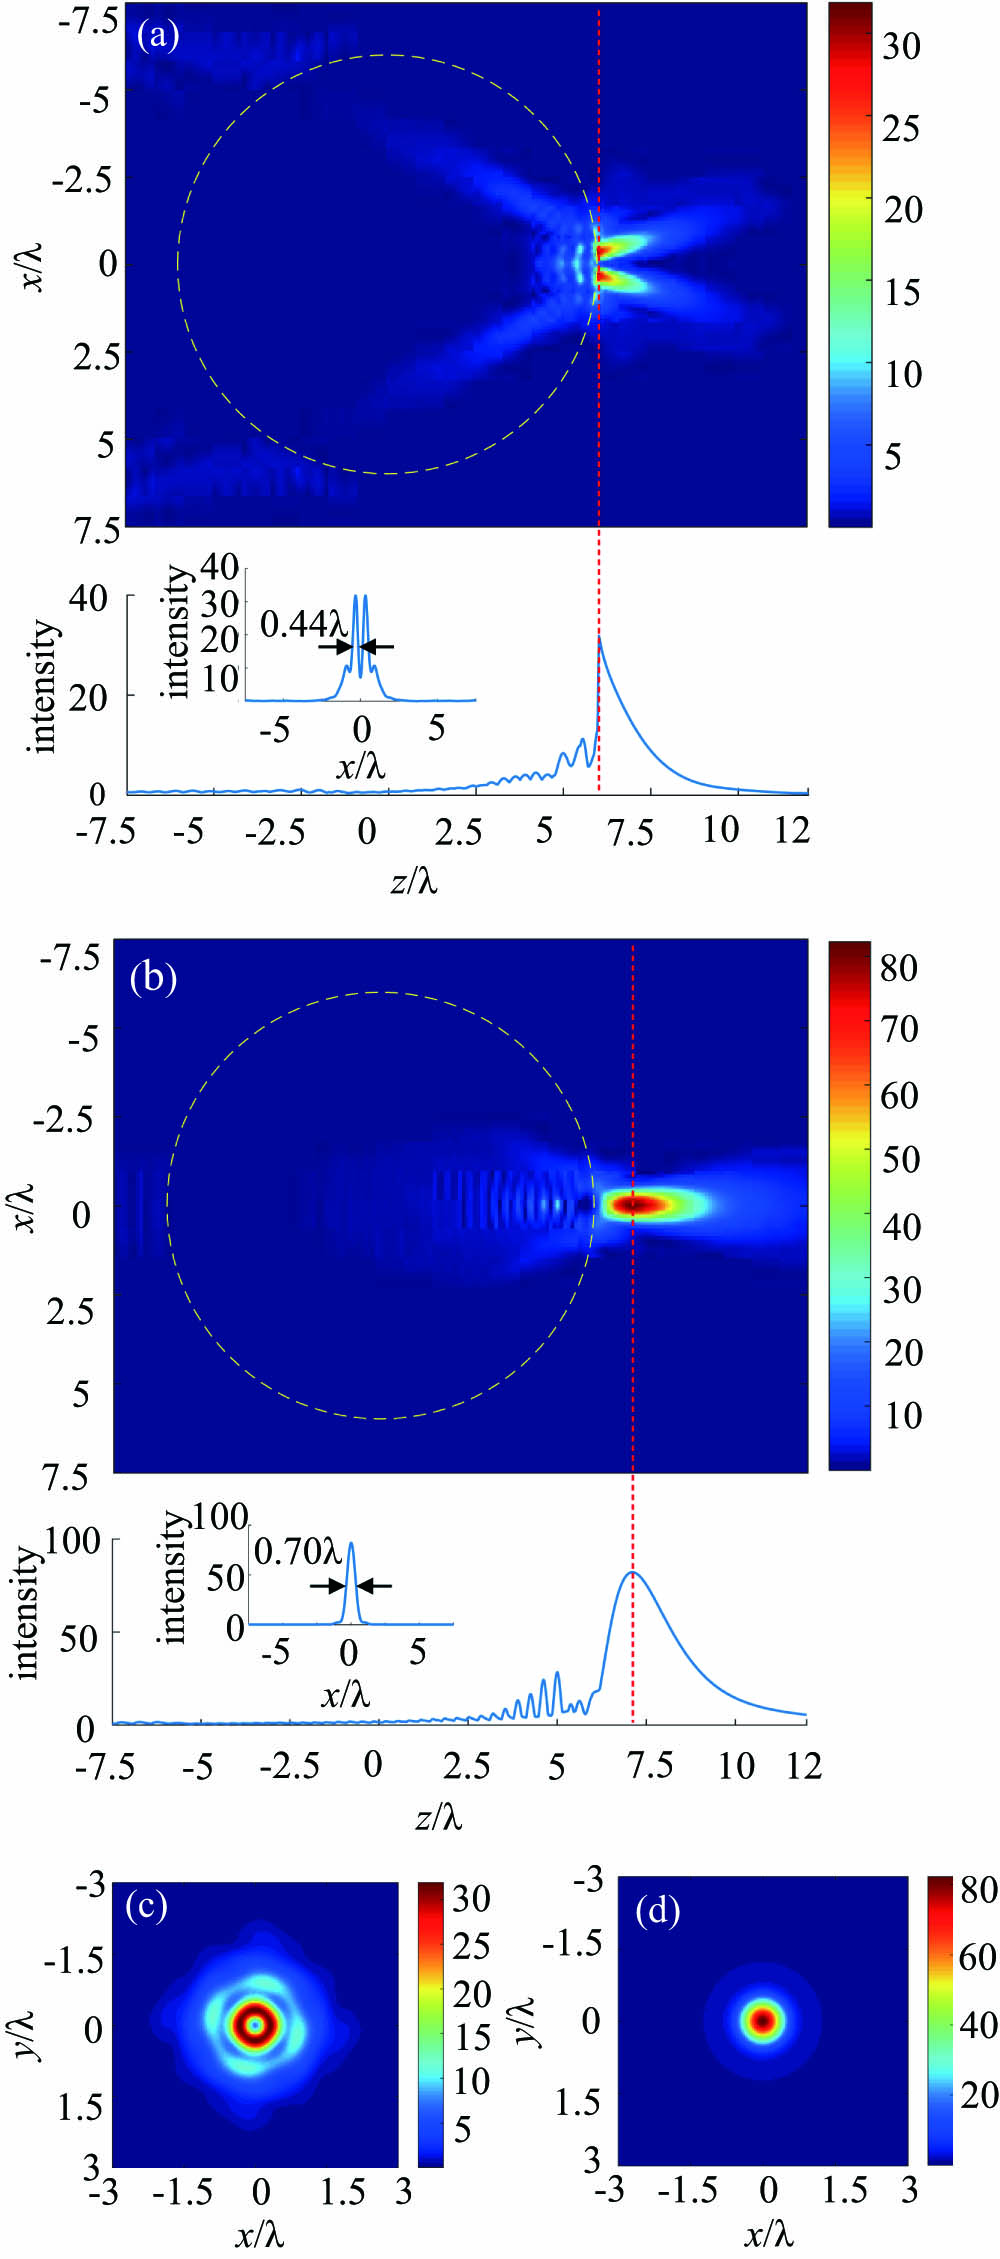 Electric field intensity distribution |E|2 of the PNJ generated by a dielectric sphere (R = λ) under illumination by left circularly polarized Laguerre–Gaussian beams with topological charges (a) m = 2 and (b) m = 0. For each case, the top plot is the |E|2 of the PNJ, while the bottom one is the longitudinal intensity profile. The inset is the transverse profile with marked full width at half-maximum, corresponding to the dashed red line that crosses the maximum intensity point of the PNJ. (c) and (d) plot |E|2 at the focal planes of the PNJs in (a) and (b), respectively.